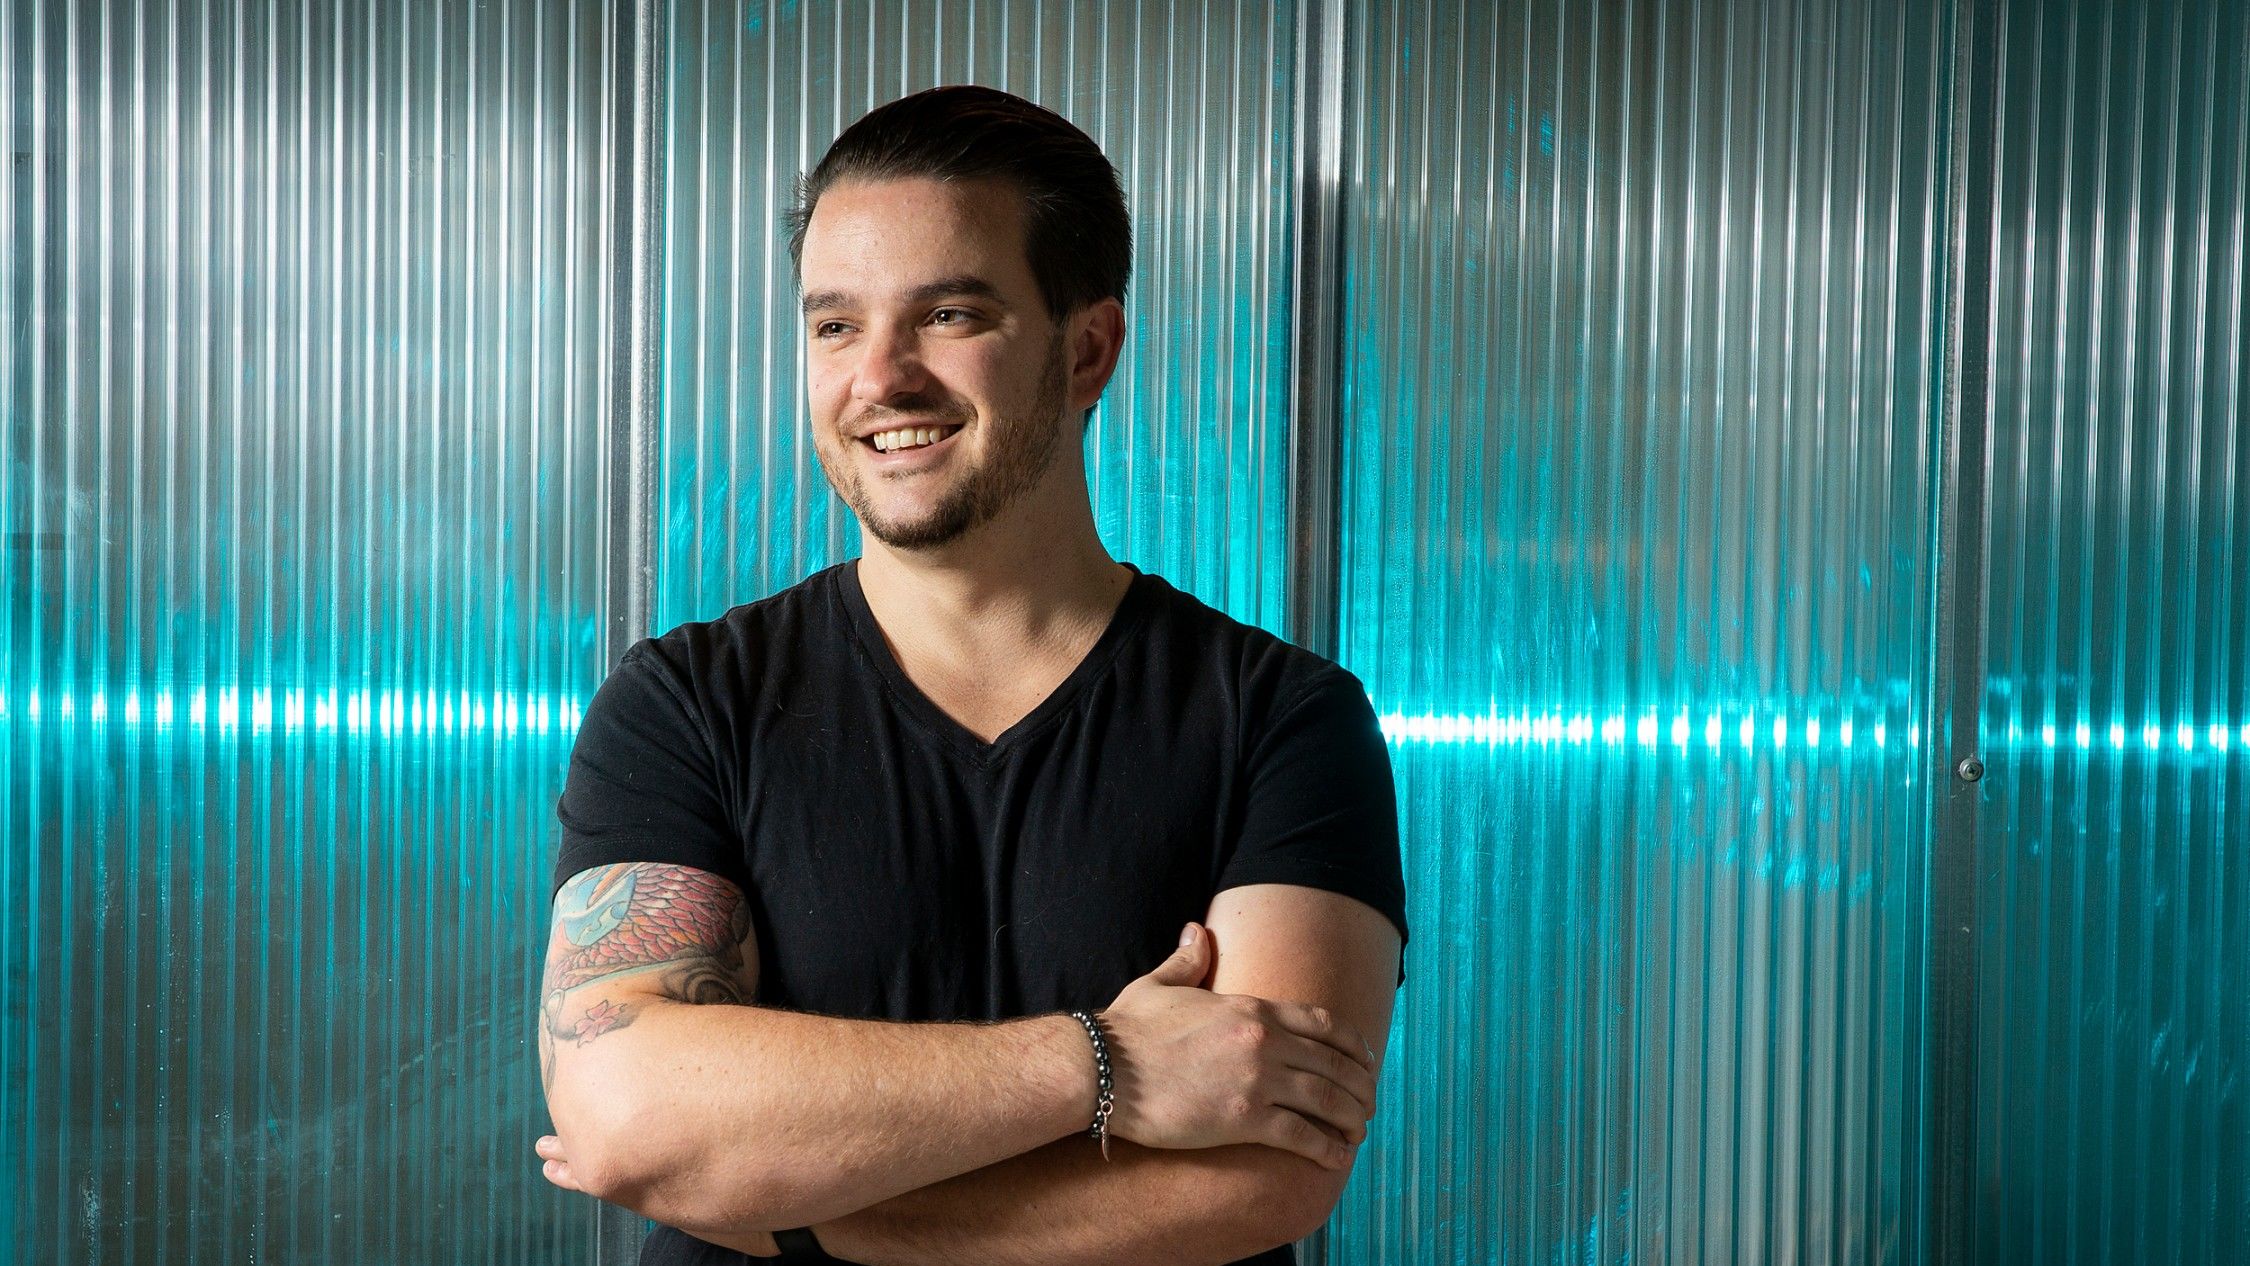 Image of Jared Cannon, founder of Simply Good Jars.